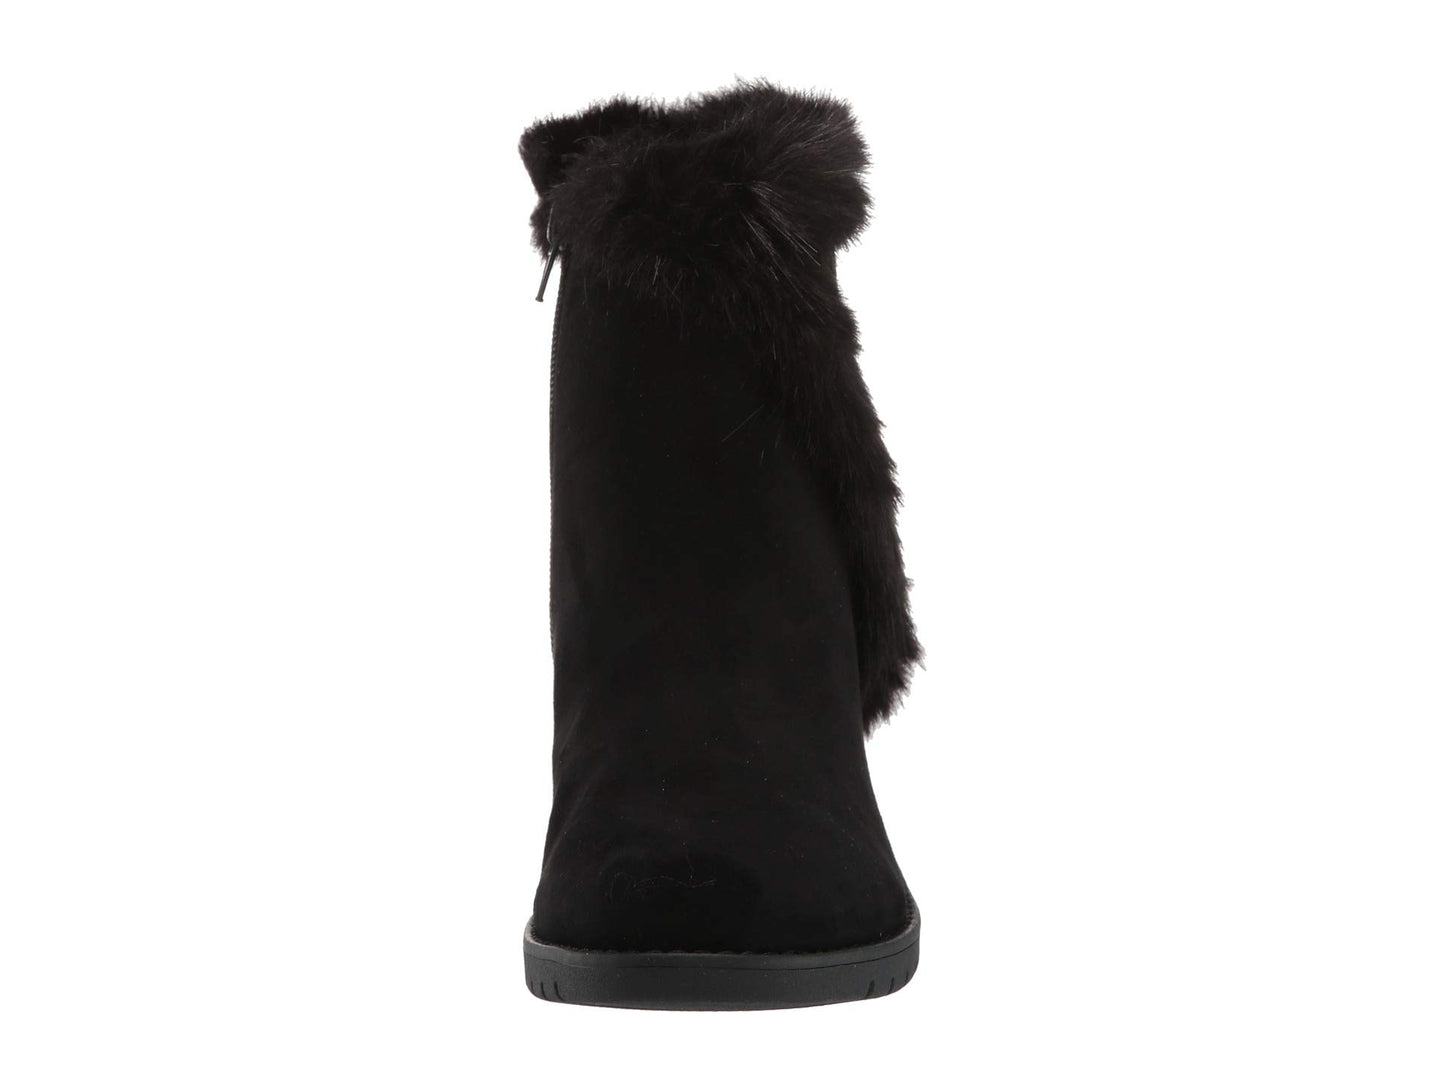 Noble Black Suede Me Too Ankle Boots